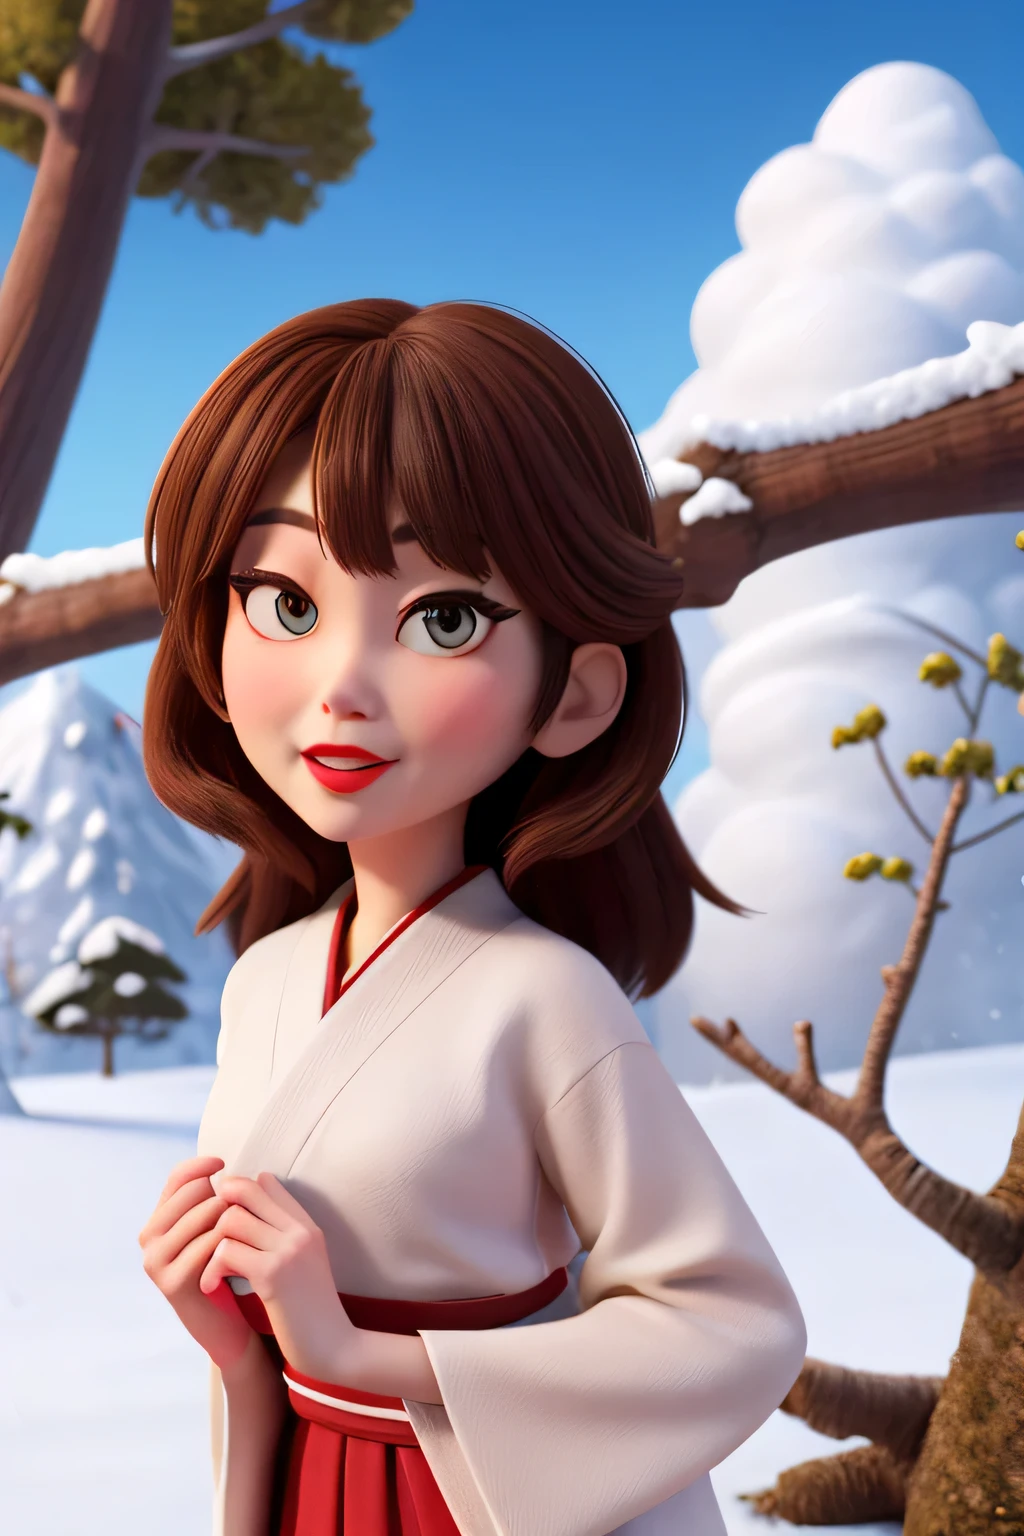 Brown-haired woman, yuki-onna, beautiful white kimono, snow mountains, tree with fallen leaves々, skyporn + Clouds, Red Lipstick, Big lips, Big eyes, merry disney/Pixar-style characters